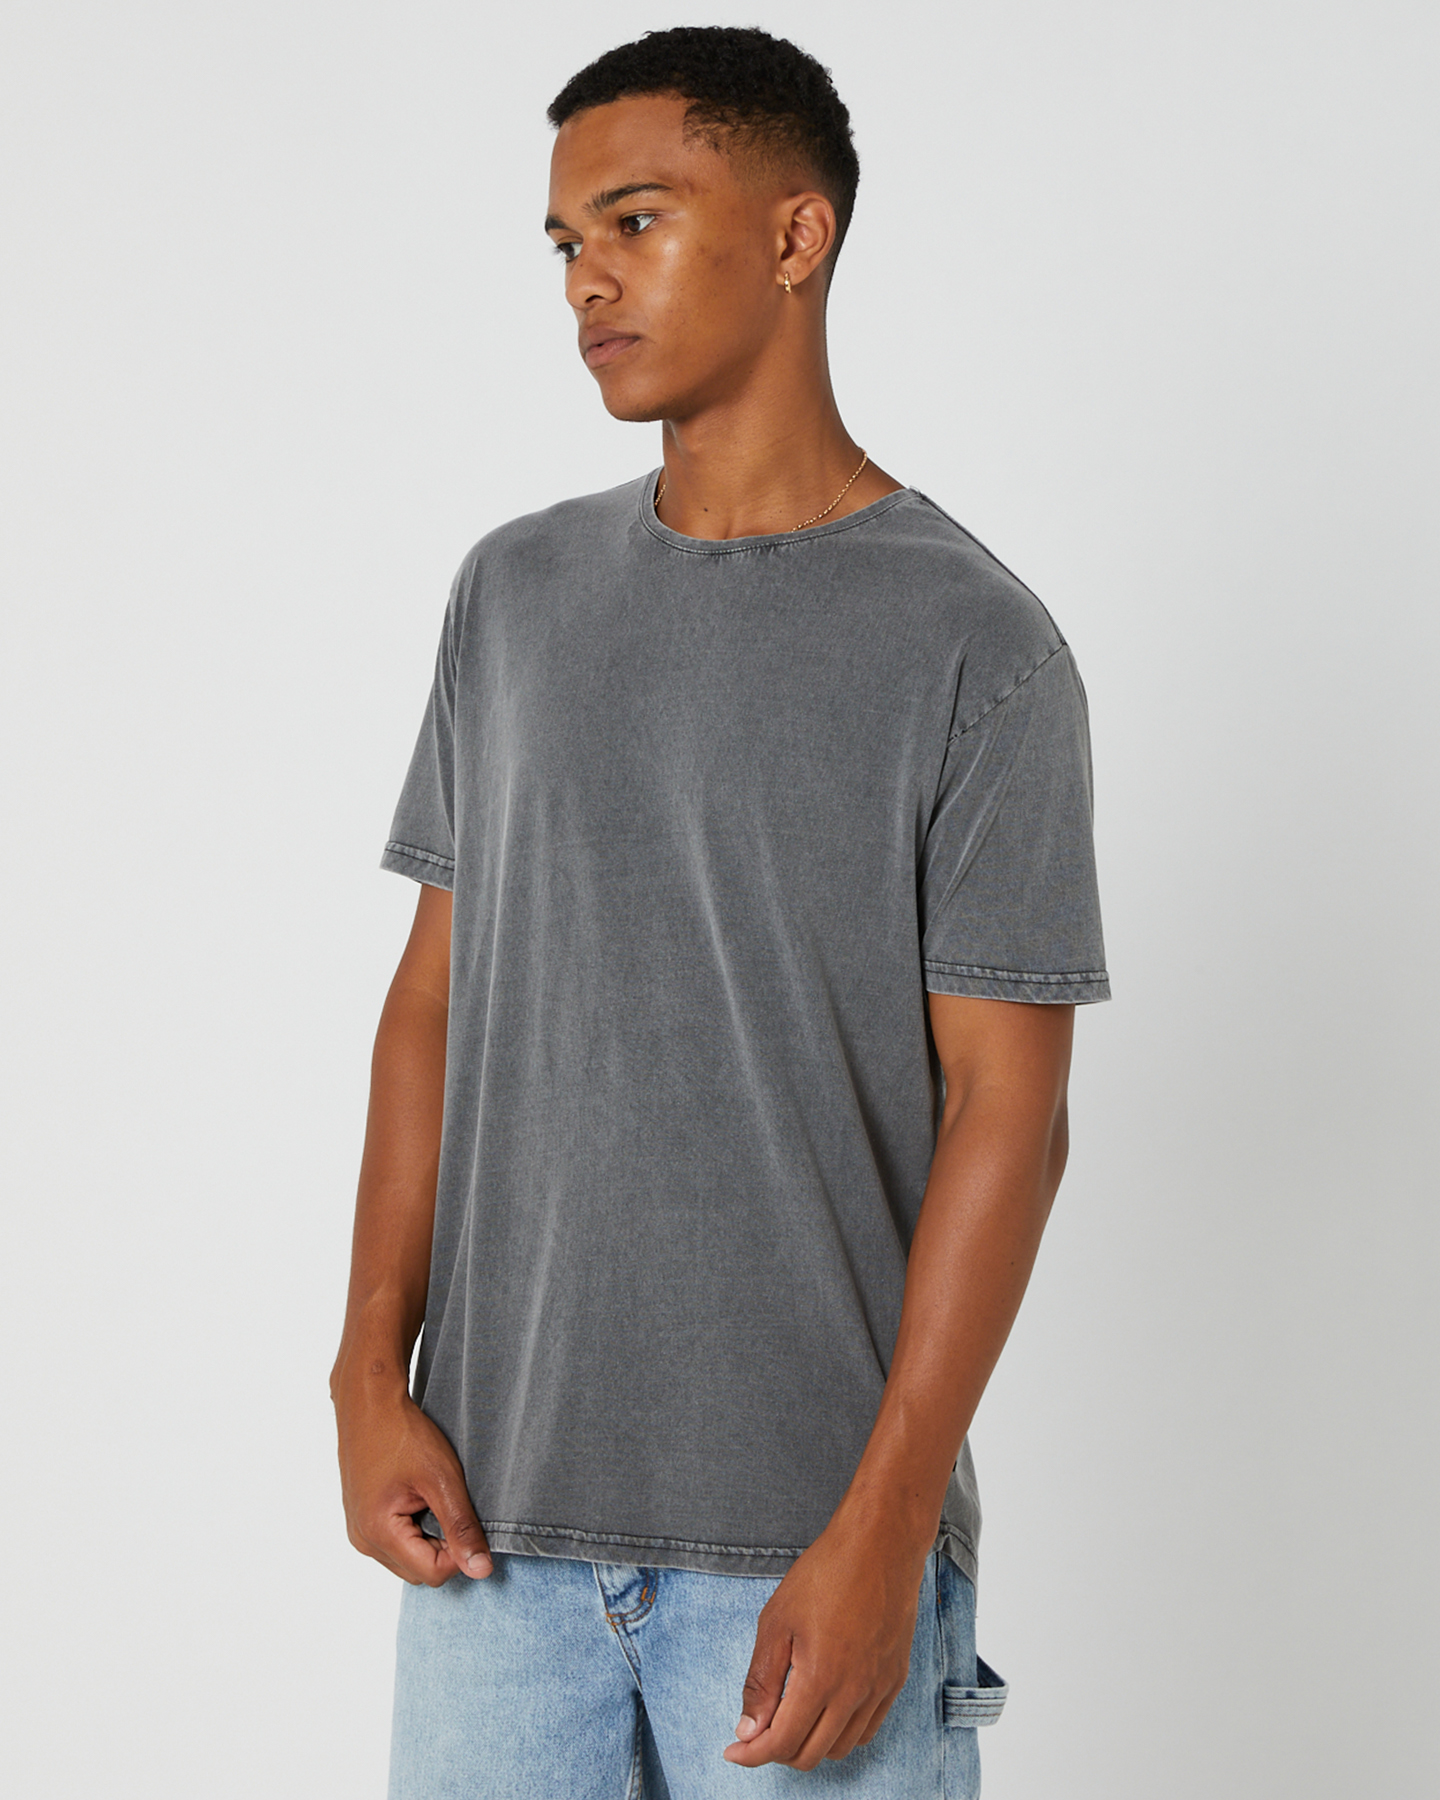 Silent Theory Acid Tail Mens Tee - Lead | SurfStitch